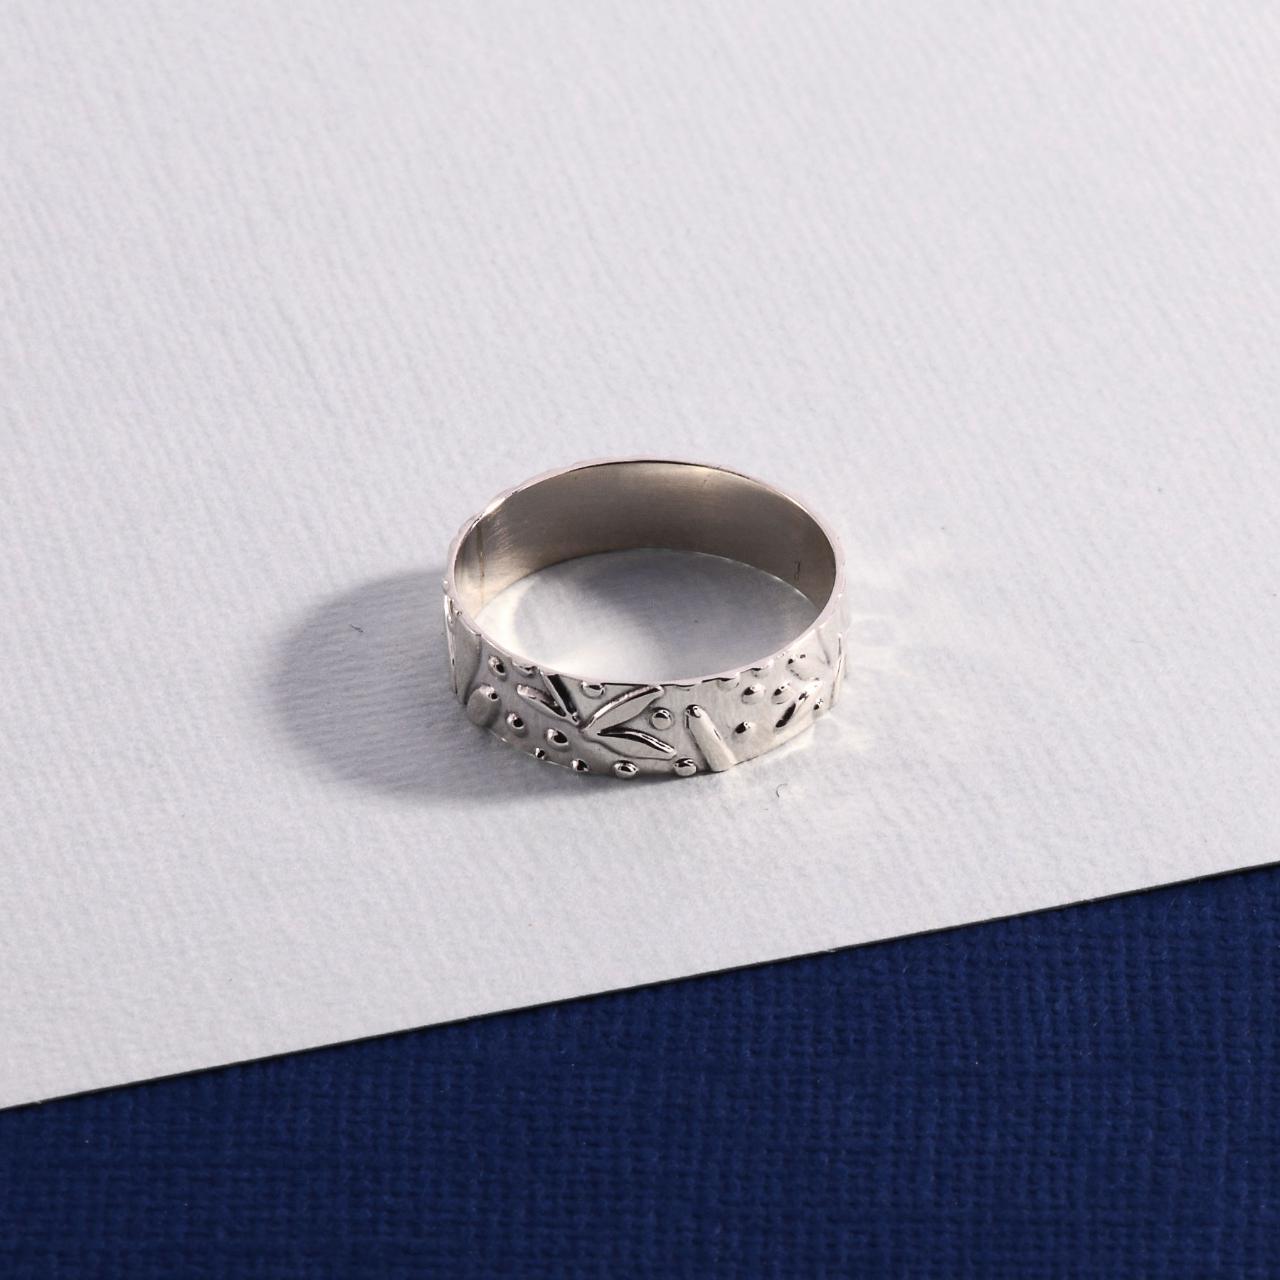 Product Image 2 - Sterling Silver Ring

Size 8

925 Symbol